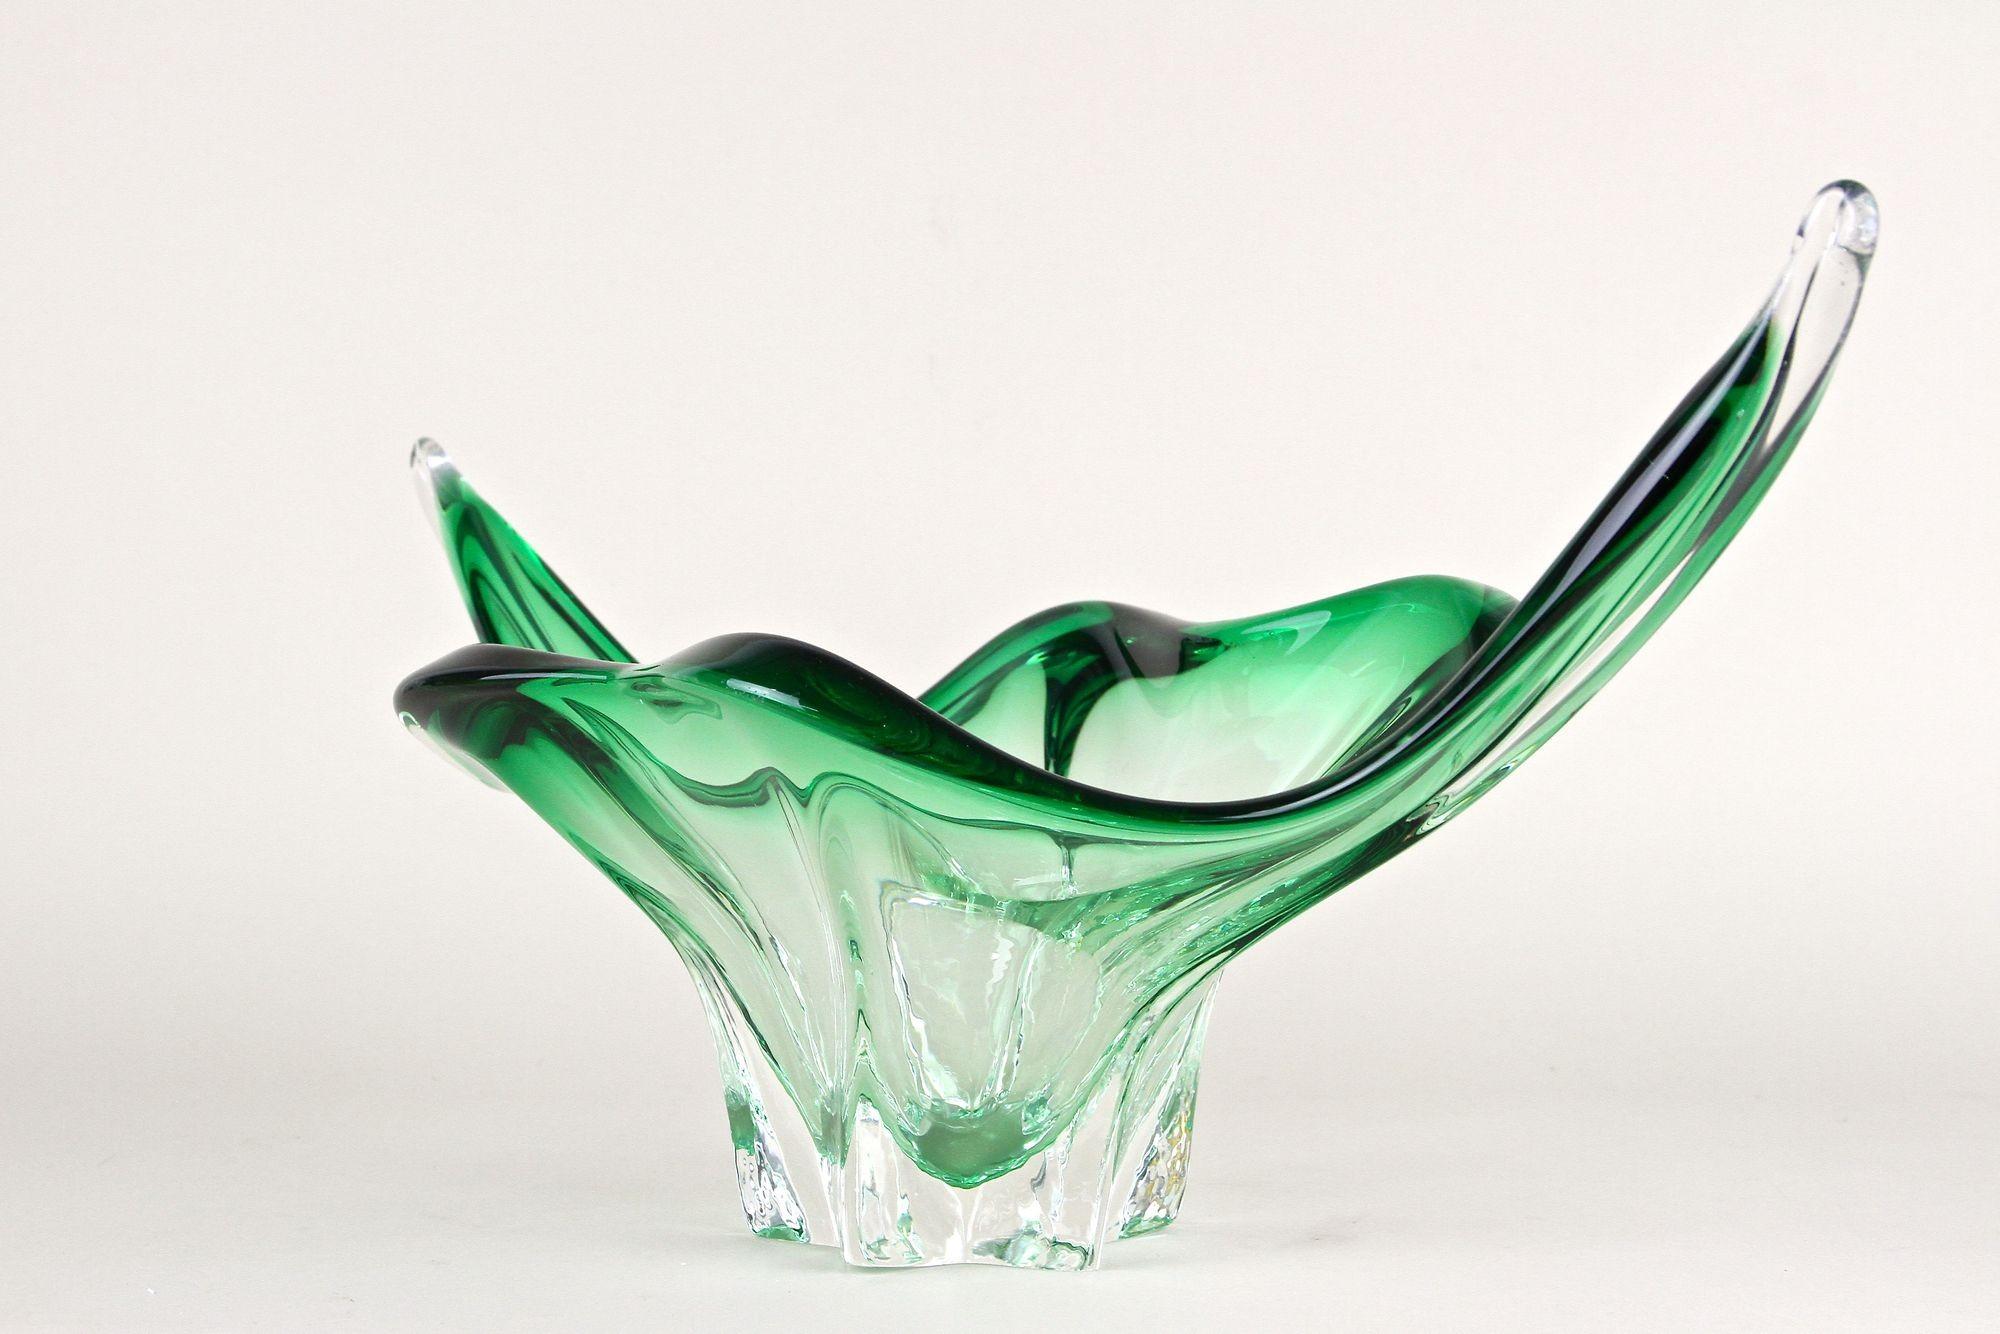 Italian Mid Century Modern Murano Glass Bowl, Green/ Clear Tones - Italy ca. 1960 For Sale